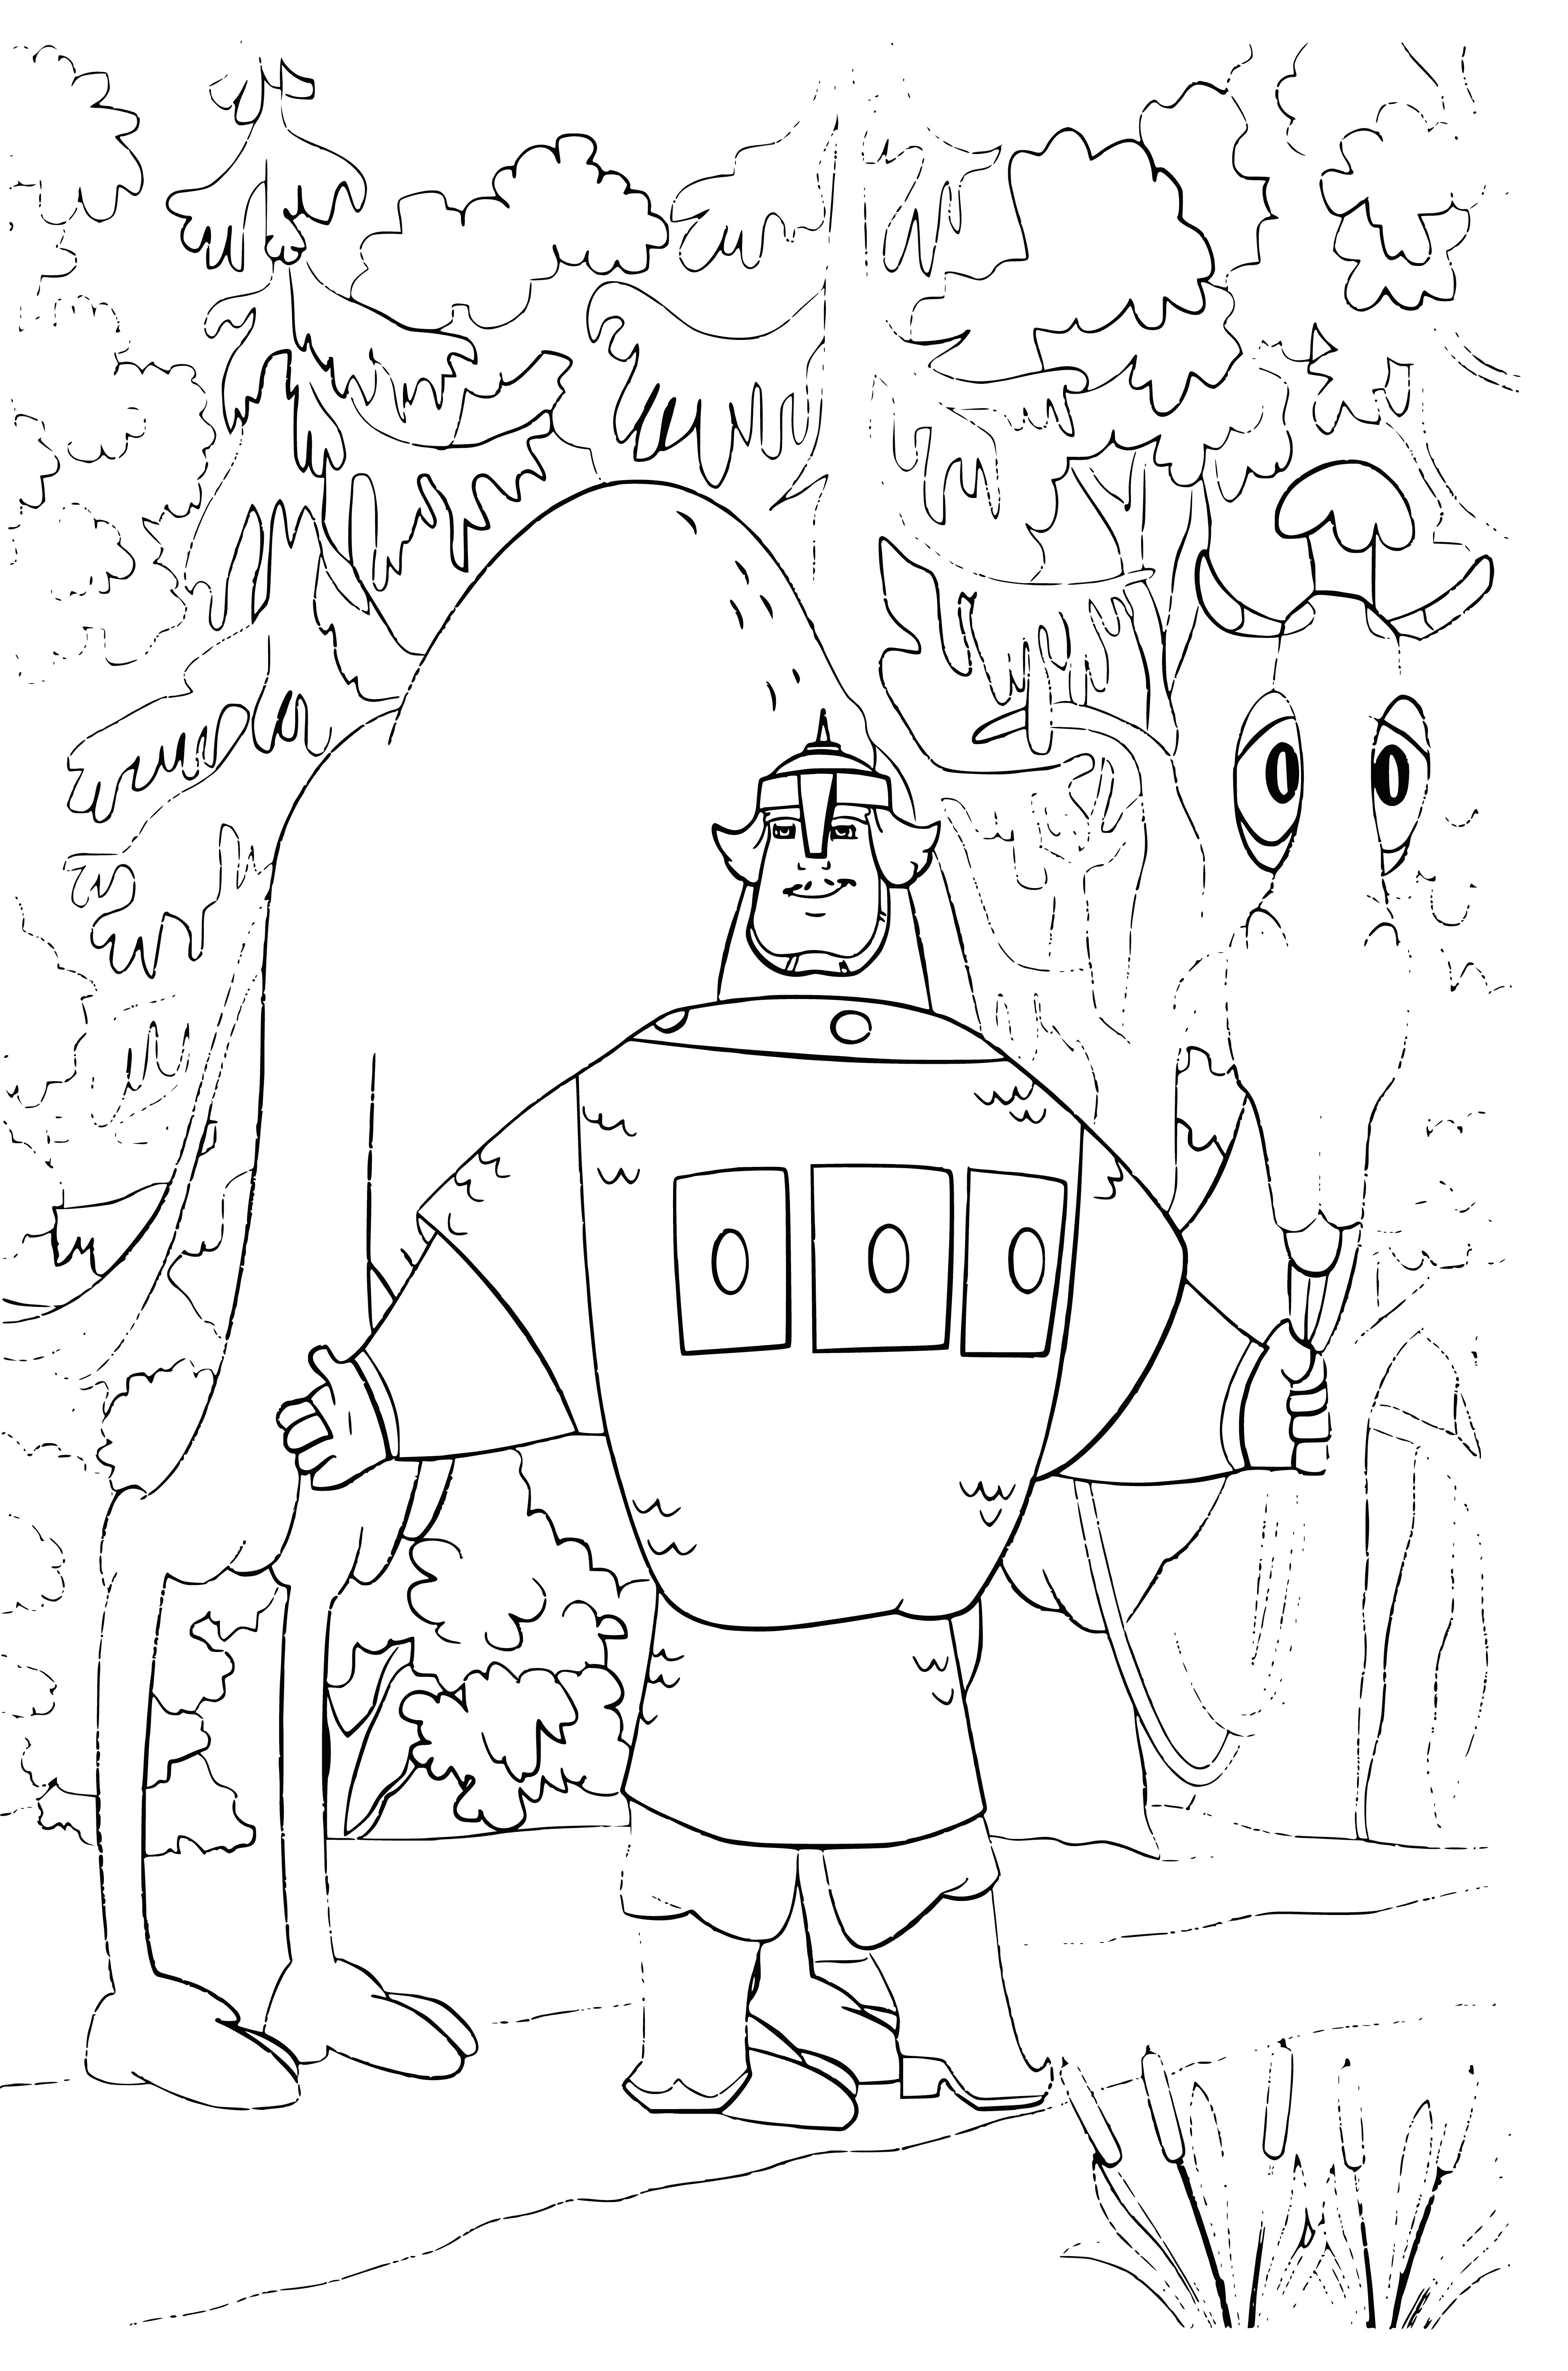 coloring page: Man in armor, cape and shield with a cross faces giant snake with large teeth, hissing aggressively.